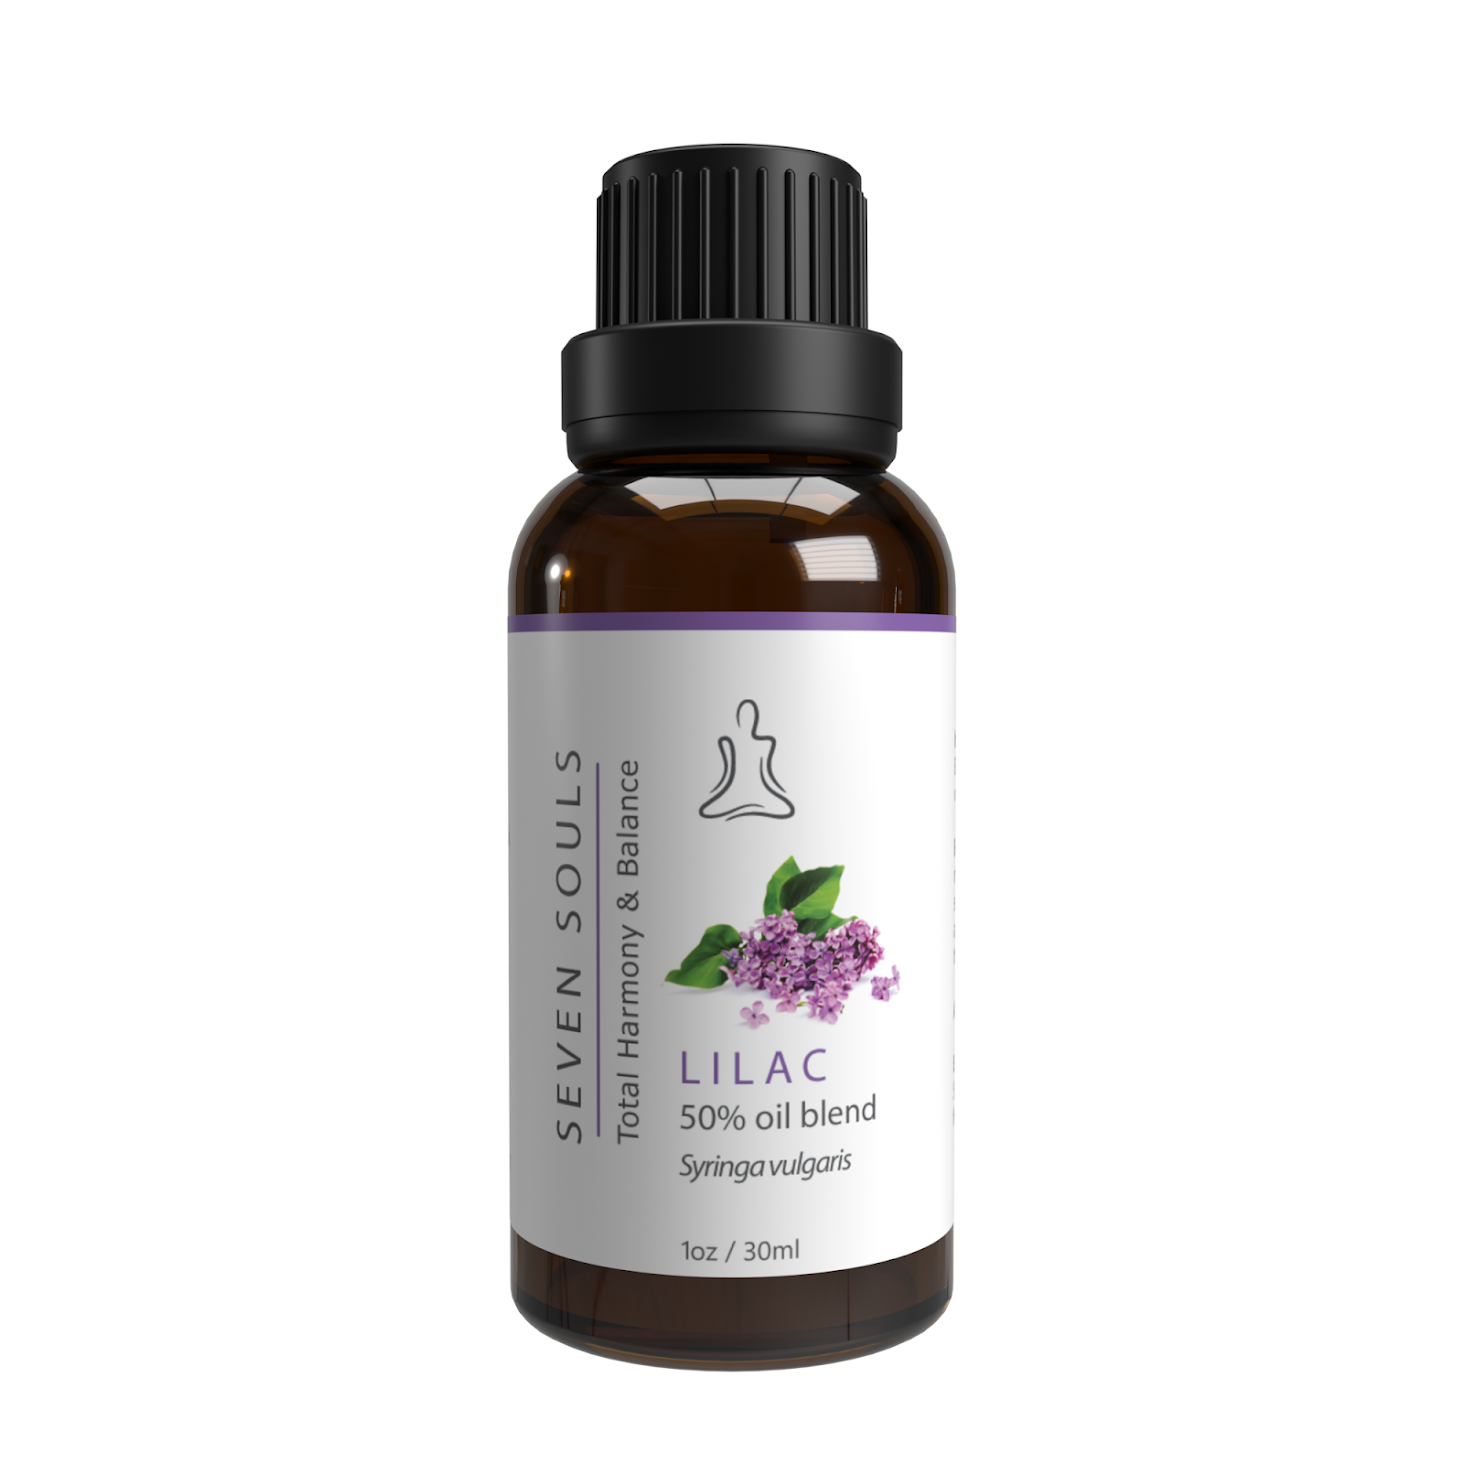 Fresh Lilac Essential Oil Perfume Natural Wildcrafted Lilac Perfume Body Oil  Aromatherapy Oil Floral, Bright, Clean Botanical Scent 